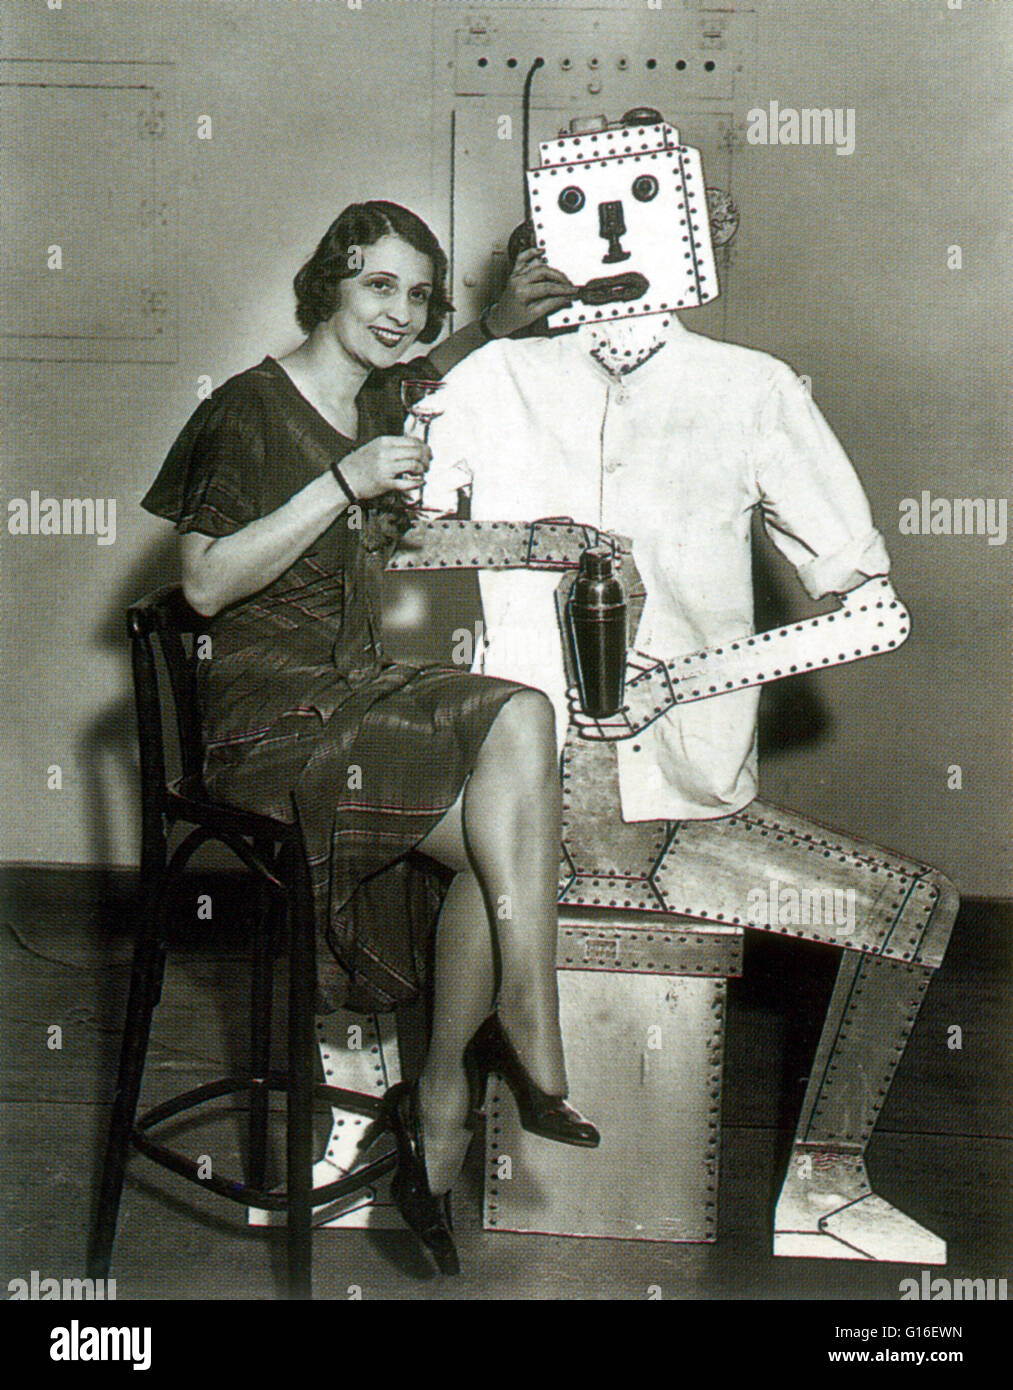 A young bar maid met the future. A cocktail robot at a bartender's school  in New York, 1933. The term "robot" was first used to denote fictional  automata in a 1921 play